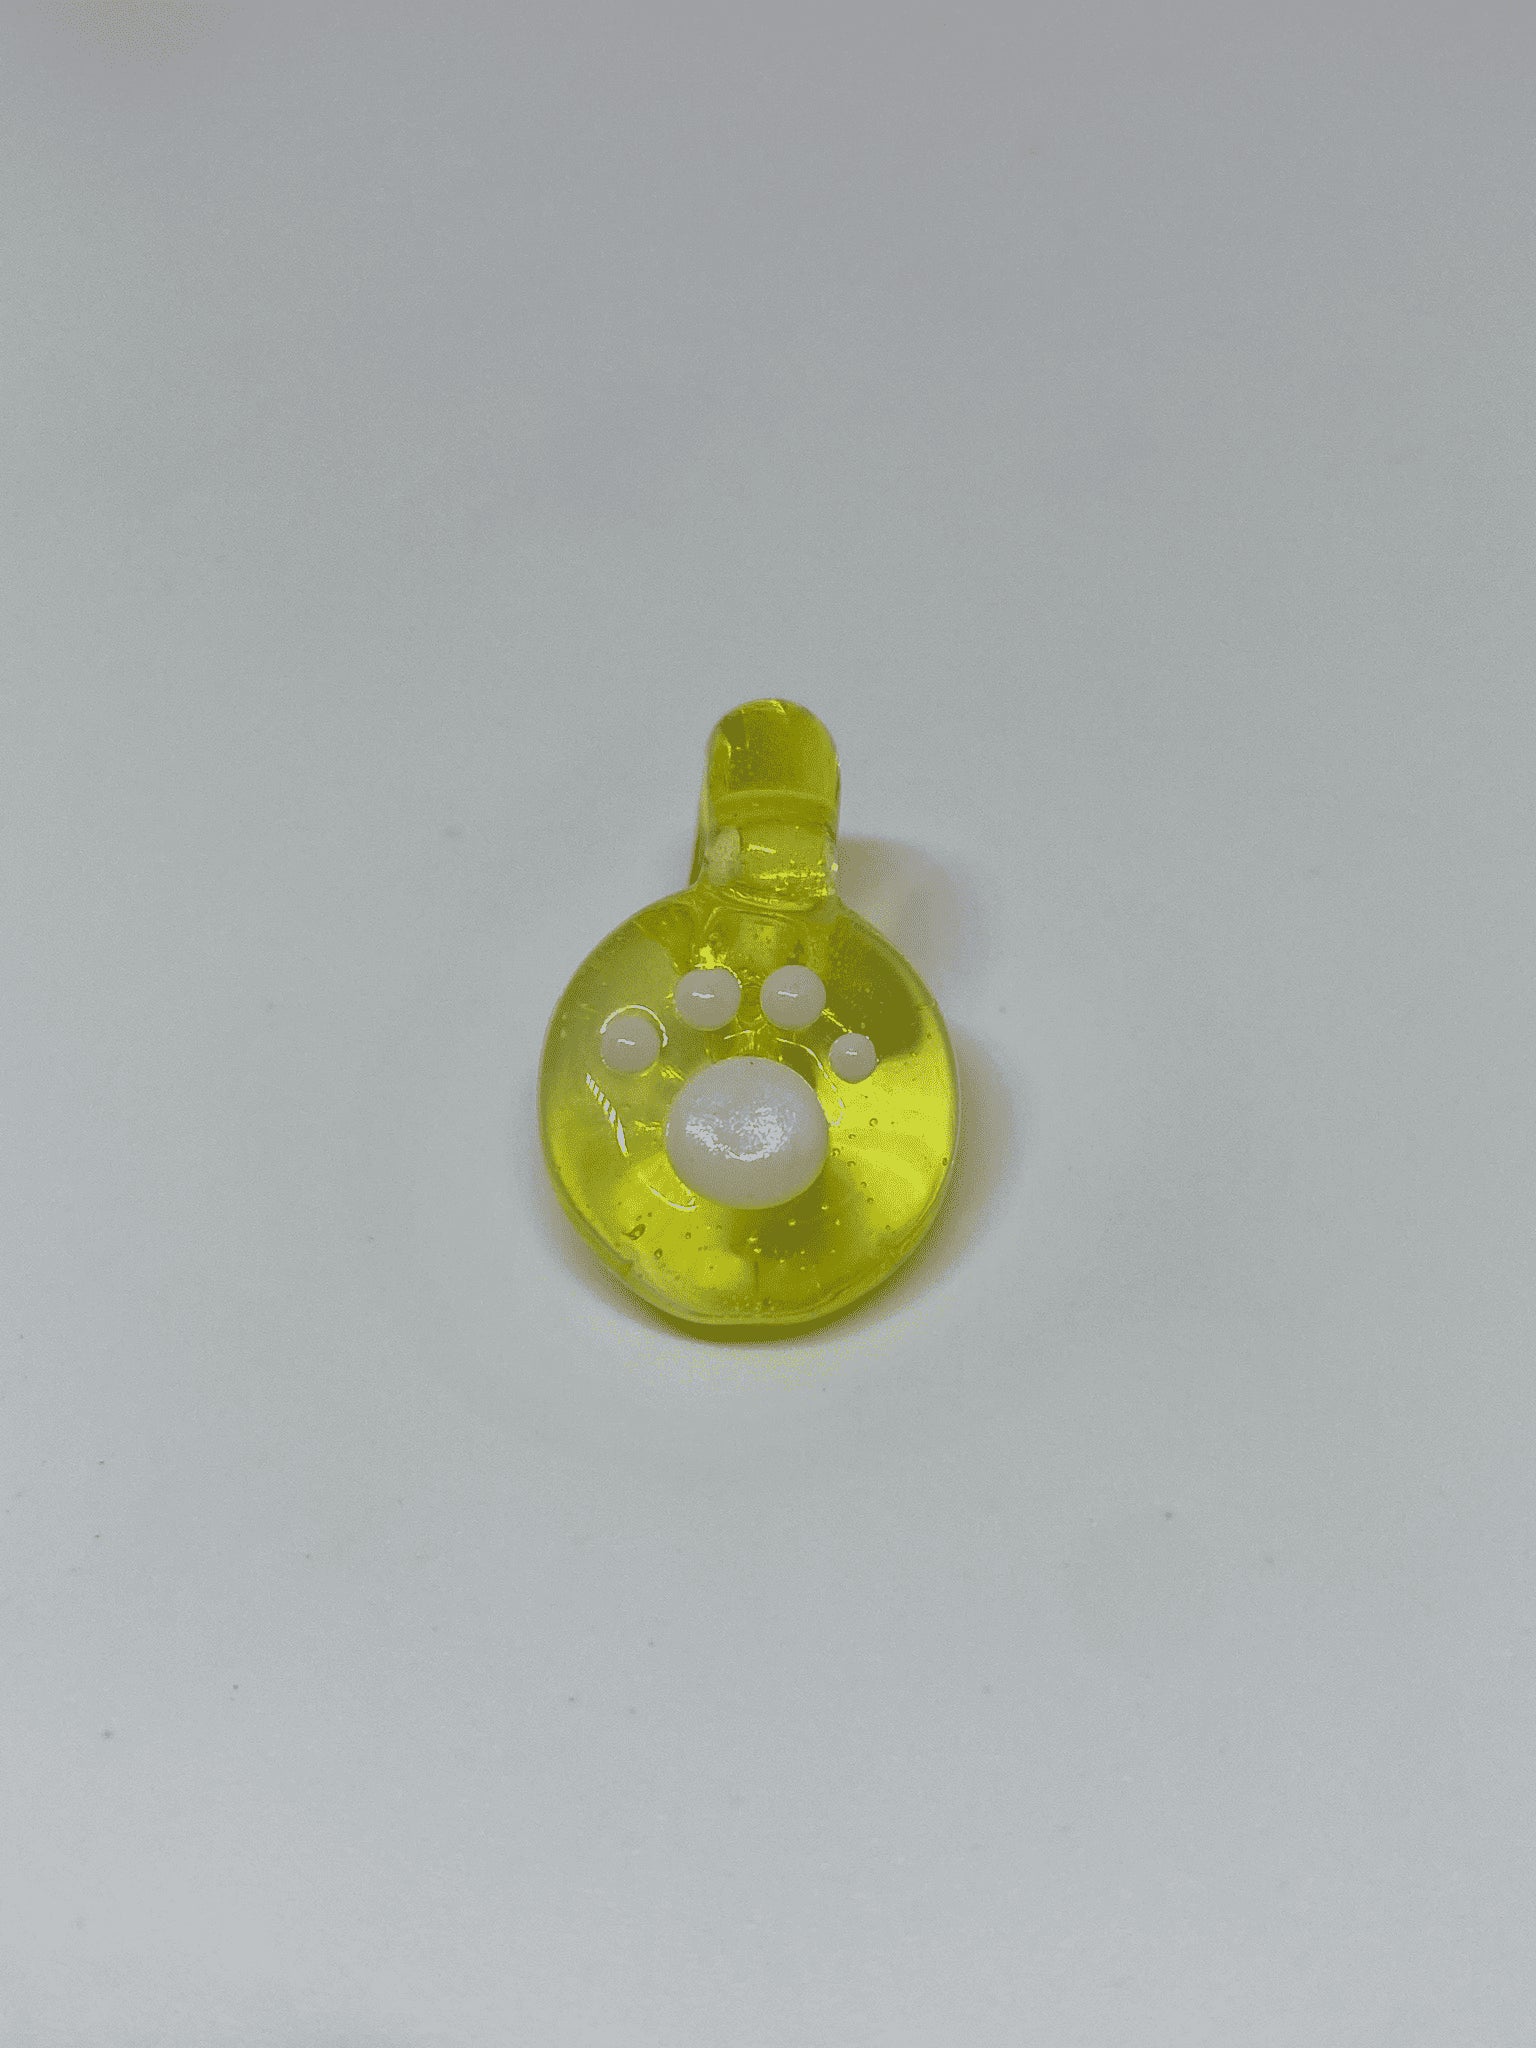 hand-blown glass pendant - Solar Flare Pet Paw Pendant by Alexander The Great Glass